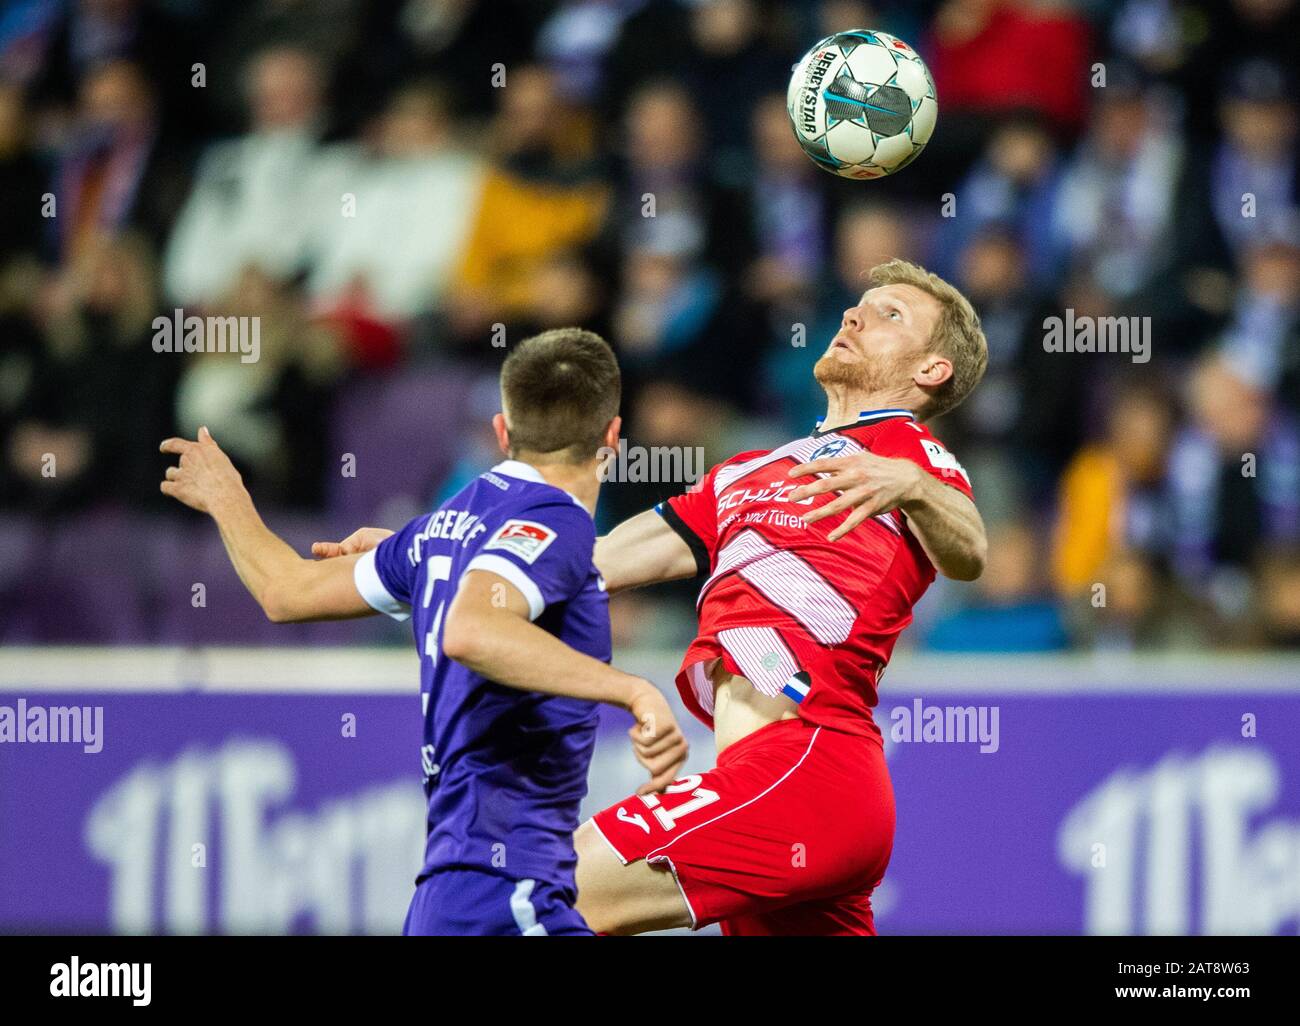 Aue, Germany. 31st Jan, 2020. Football: 2nd Bundesliga, FC Erzgebirge Aue - Arminia Bielefeld, 20th matchday, at the Sparkassen-Erzgebirgsstadion. Bielefeld's Andreas Voglsammer (r) against Aues Marko Mihojevic. Credit: Robert Michael/dpa - IMPORTANT NOTE: In accordance with the regulations of the DFL Deutsche Fußball Liga and the DFB Deutscher Fußball-Bund, it is prohibited to exploit or have exploited in the stadium and/or from the game taken photographs in the form of sequence images and/or video-like photo series./dpa/Alamy Live News Stock Photo